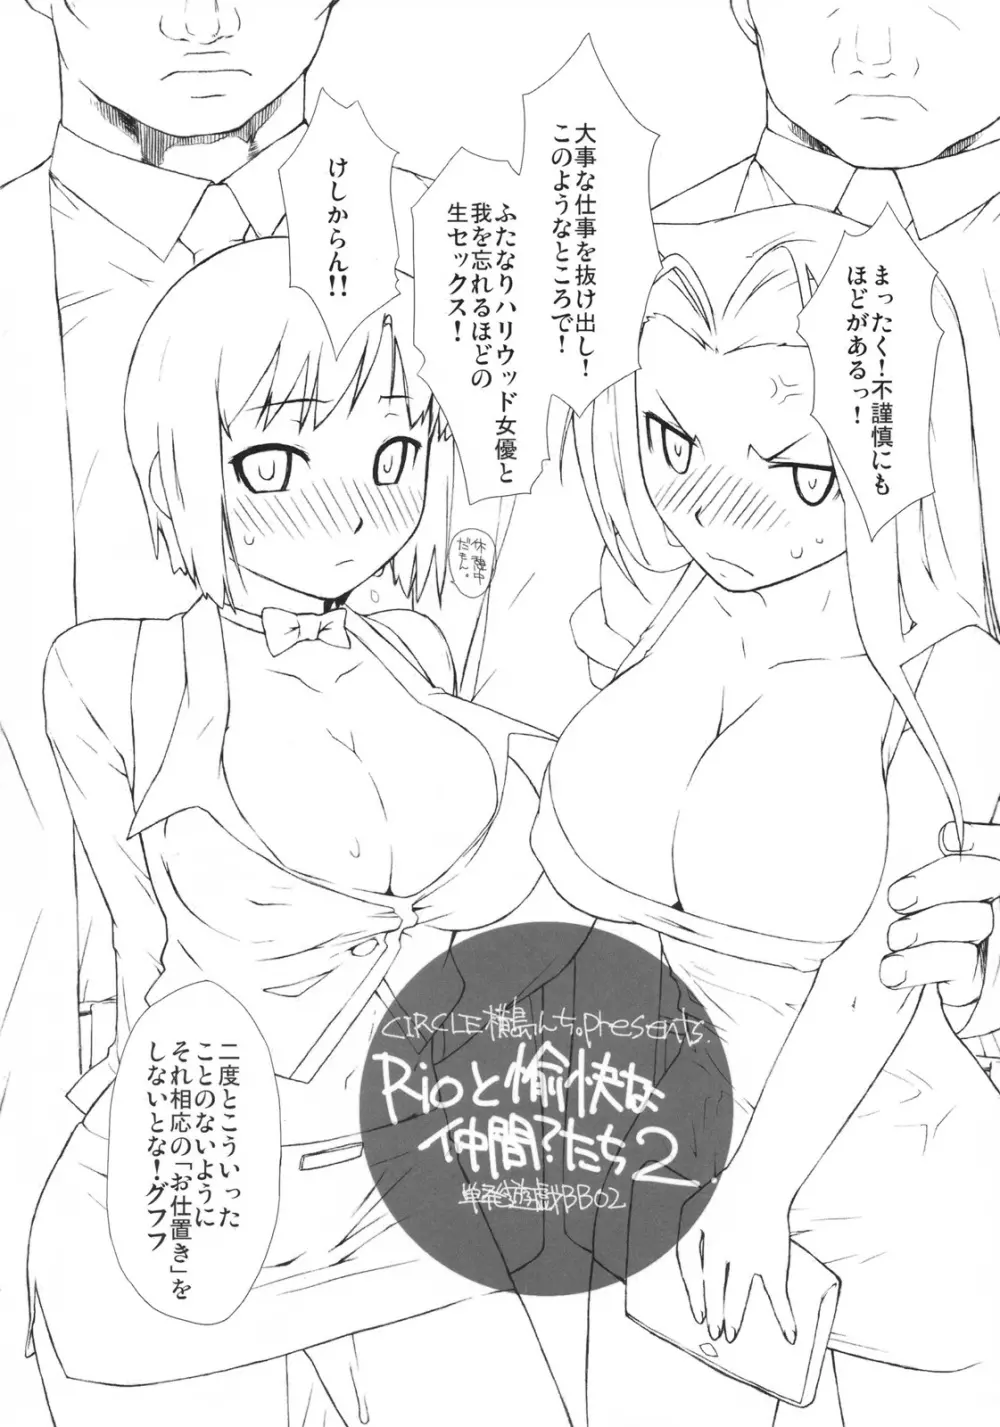 Rioと愉快な仲間？たち２ Page.5